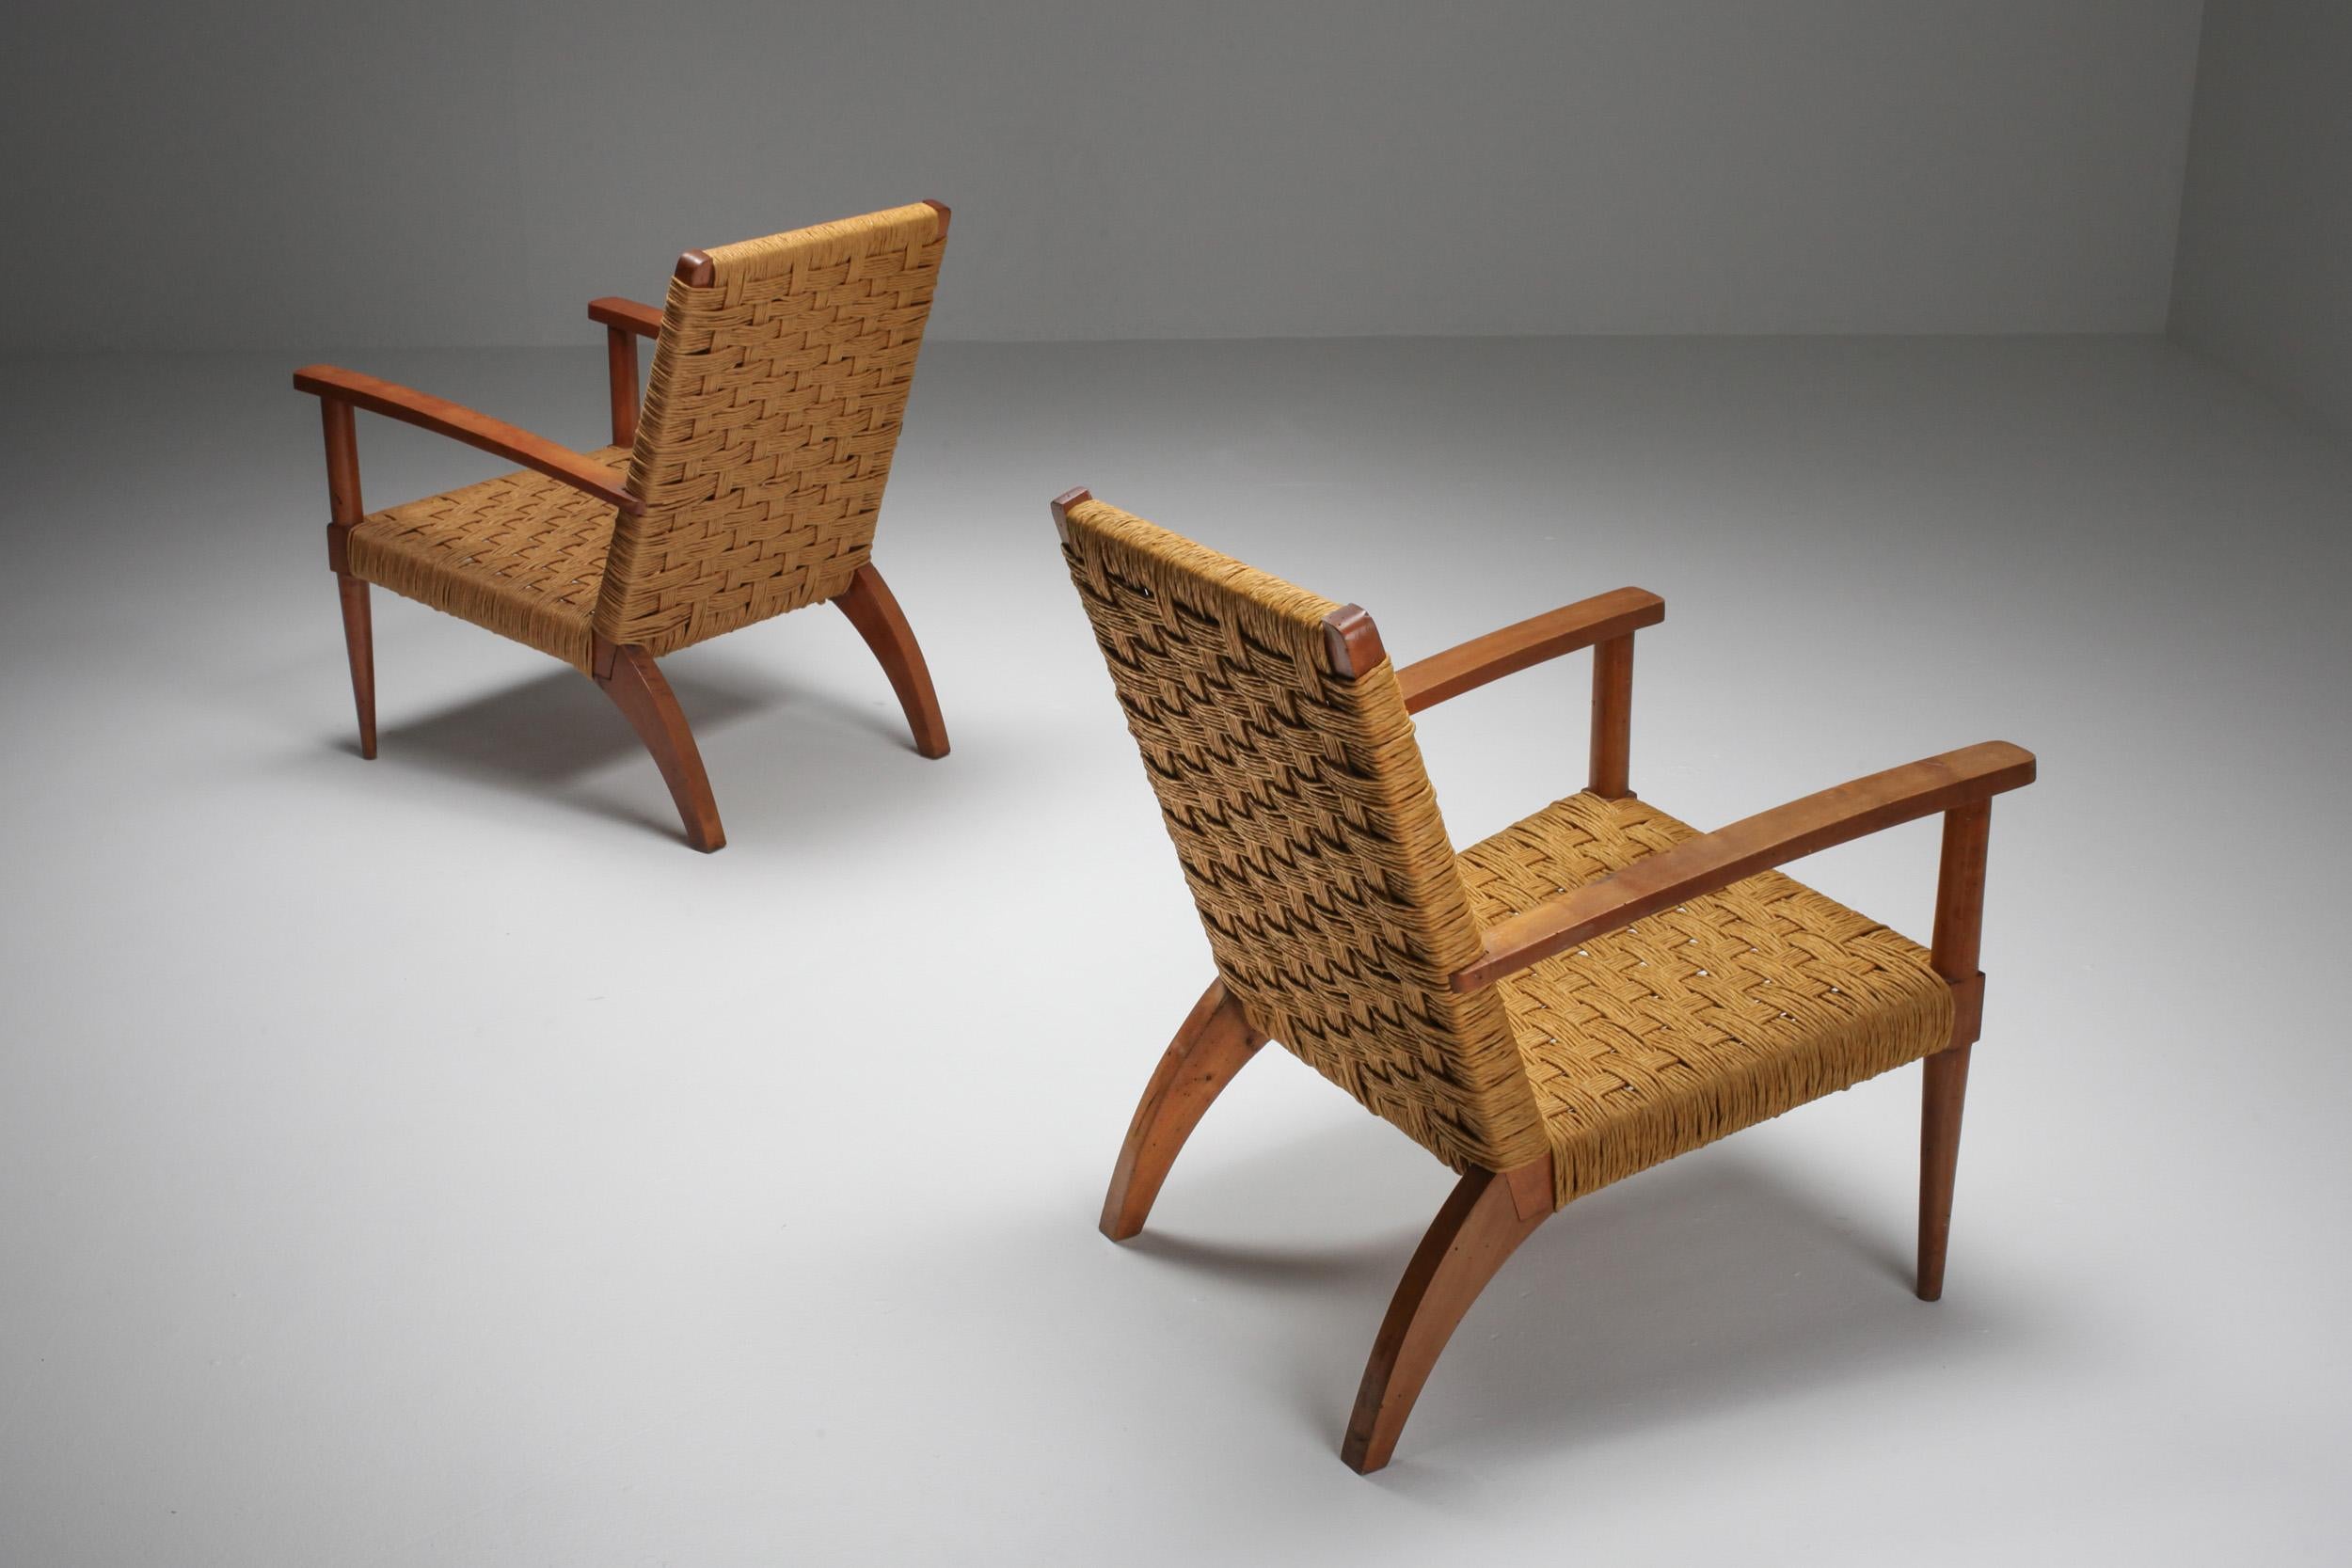 Beech and cord Mid-Century Modern pair of armchairs, Audoux Minet, France, 1960s

Rustic modern pair of French armchairs that would fit well in a naturalist wabi sabi decor.
  